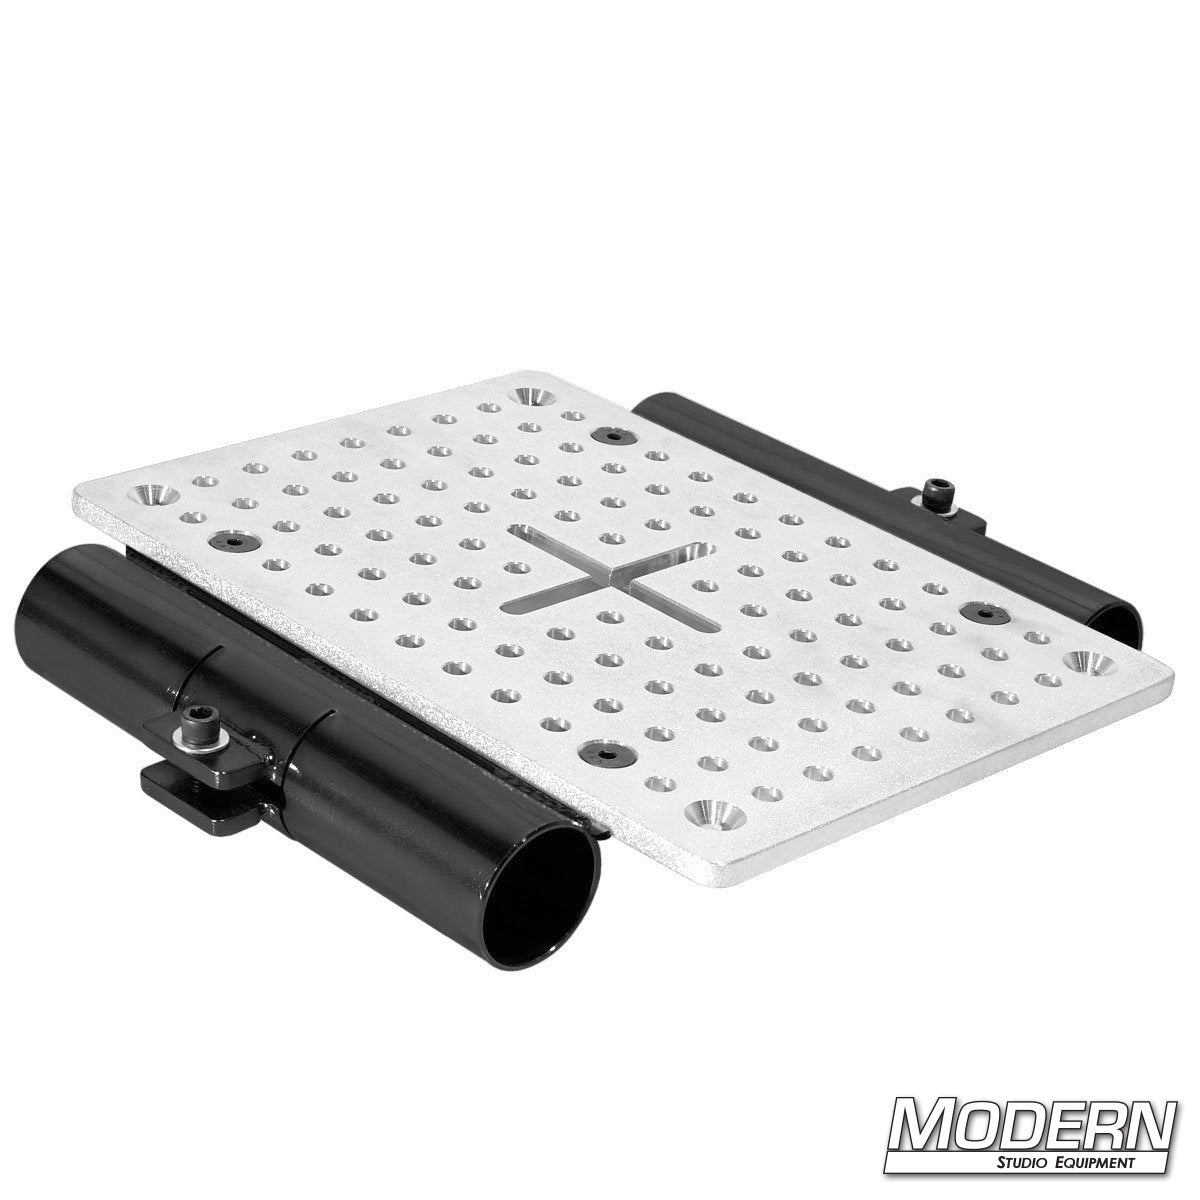 Cheese Plate with 3/8" Slot and Two 1-1/2" Slider Brackets for Hood Mount